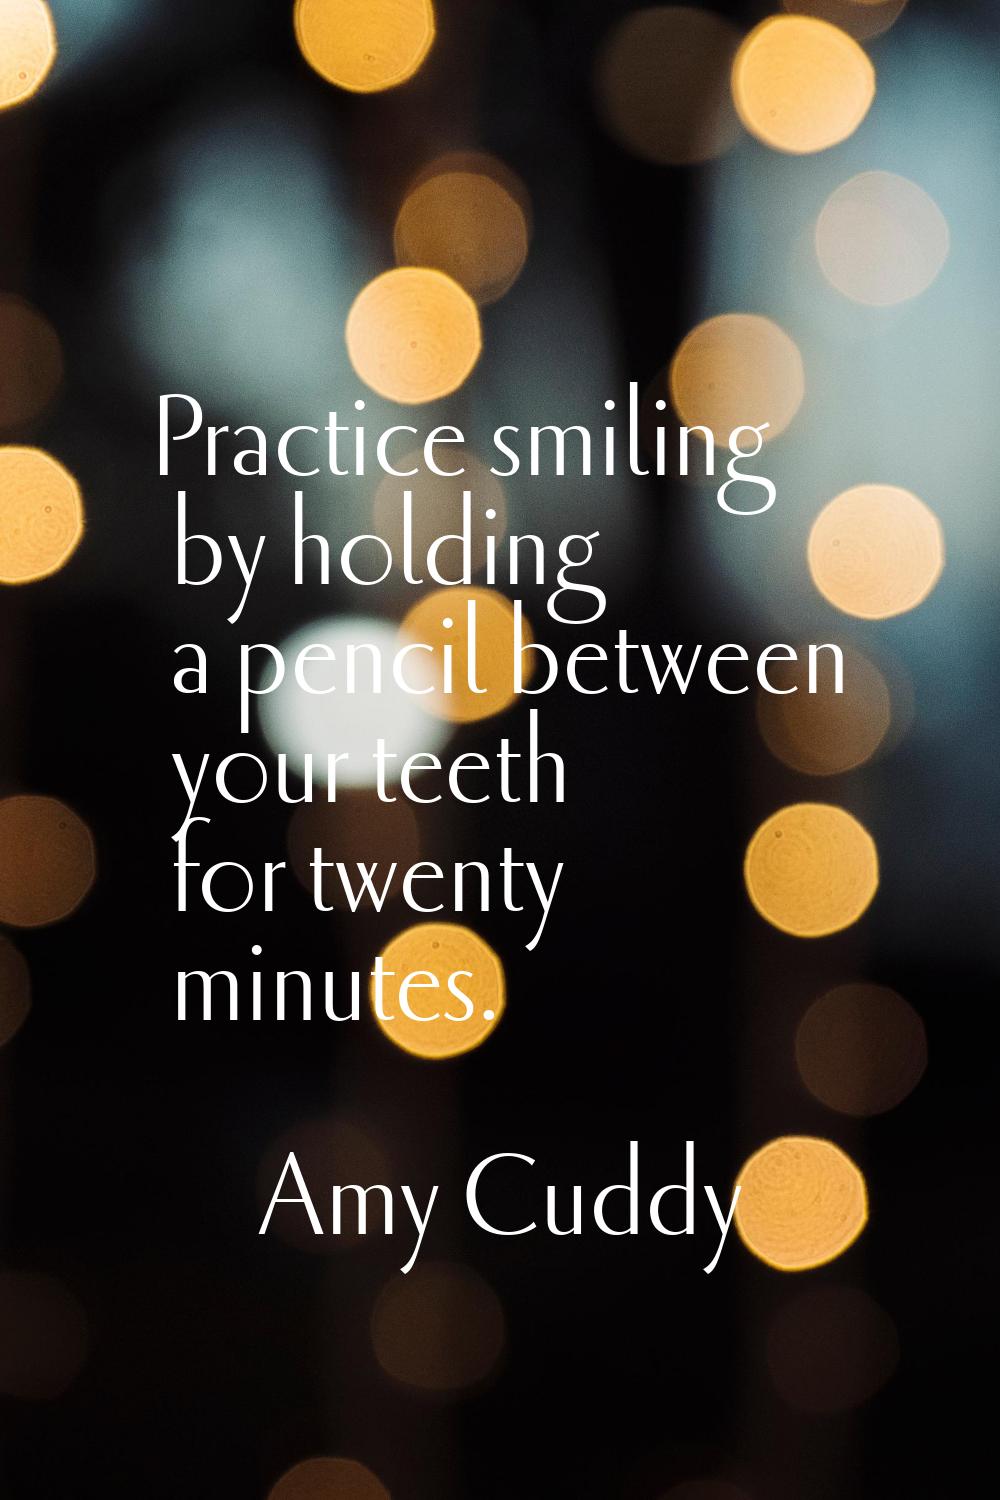 Practice smiling by holding a pencil between your teeth for twenty minutes.